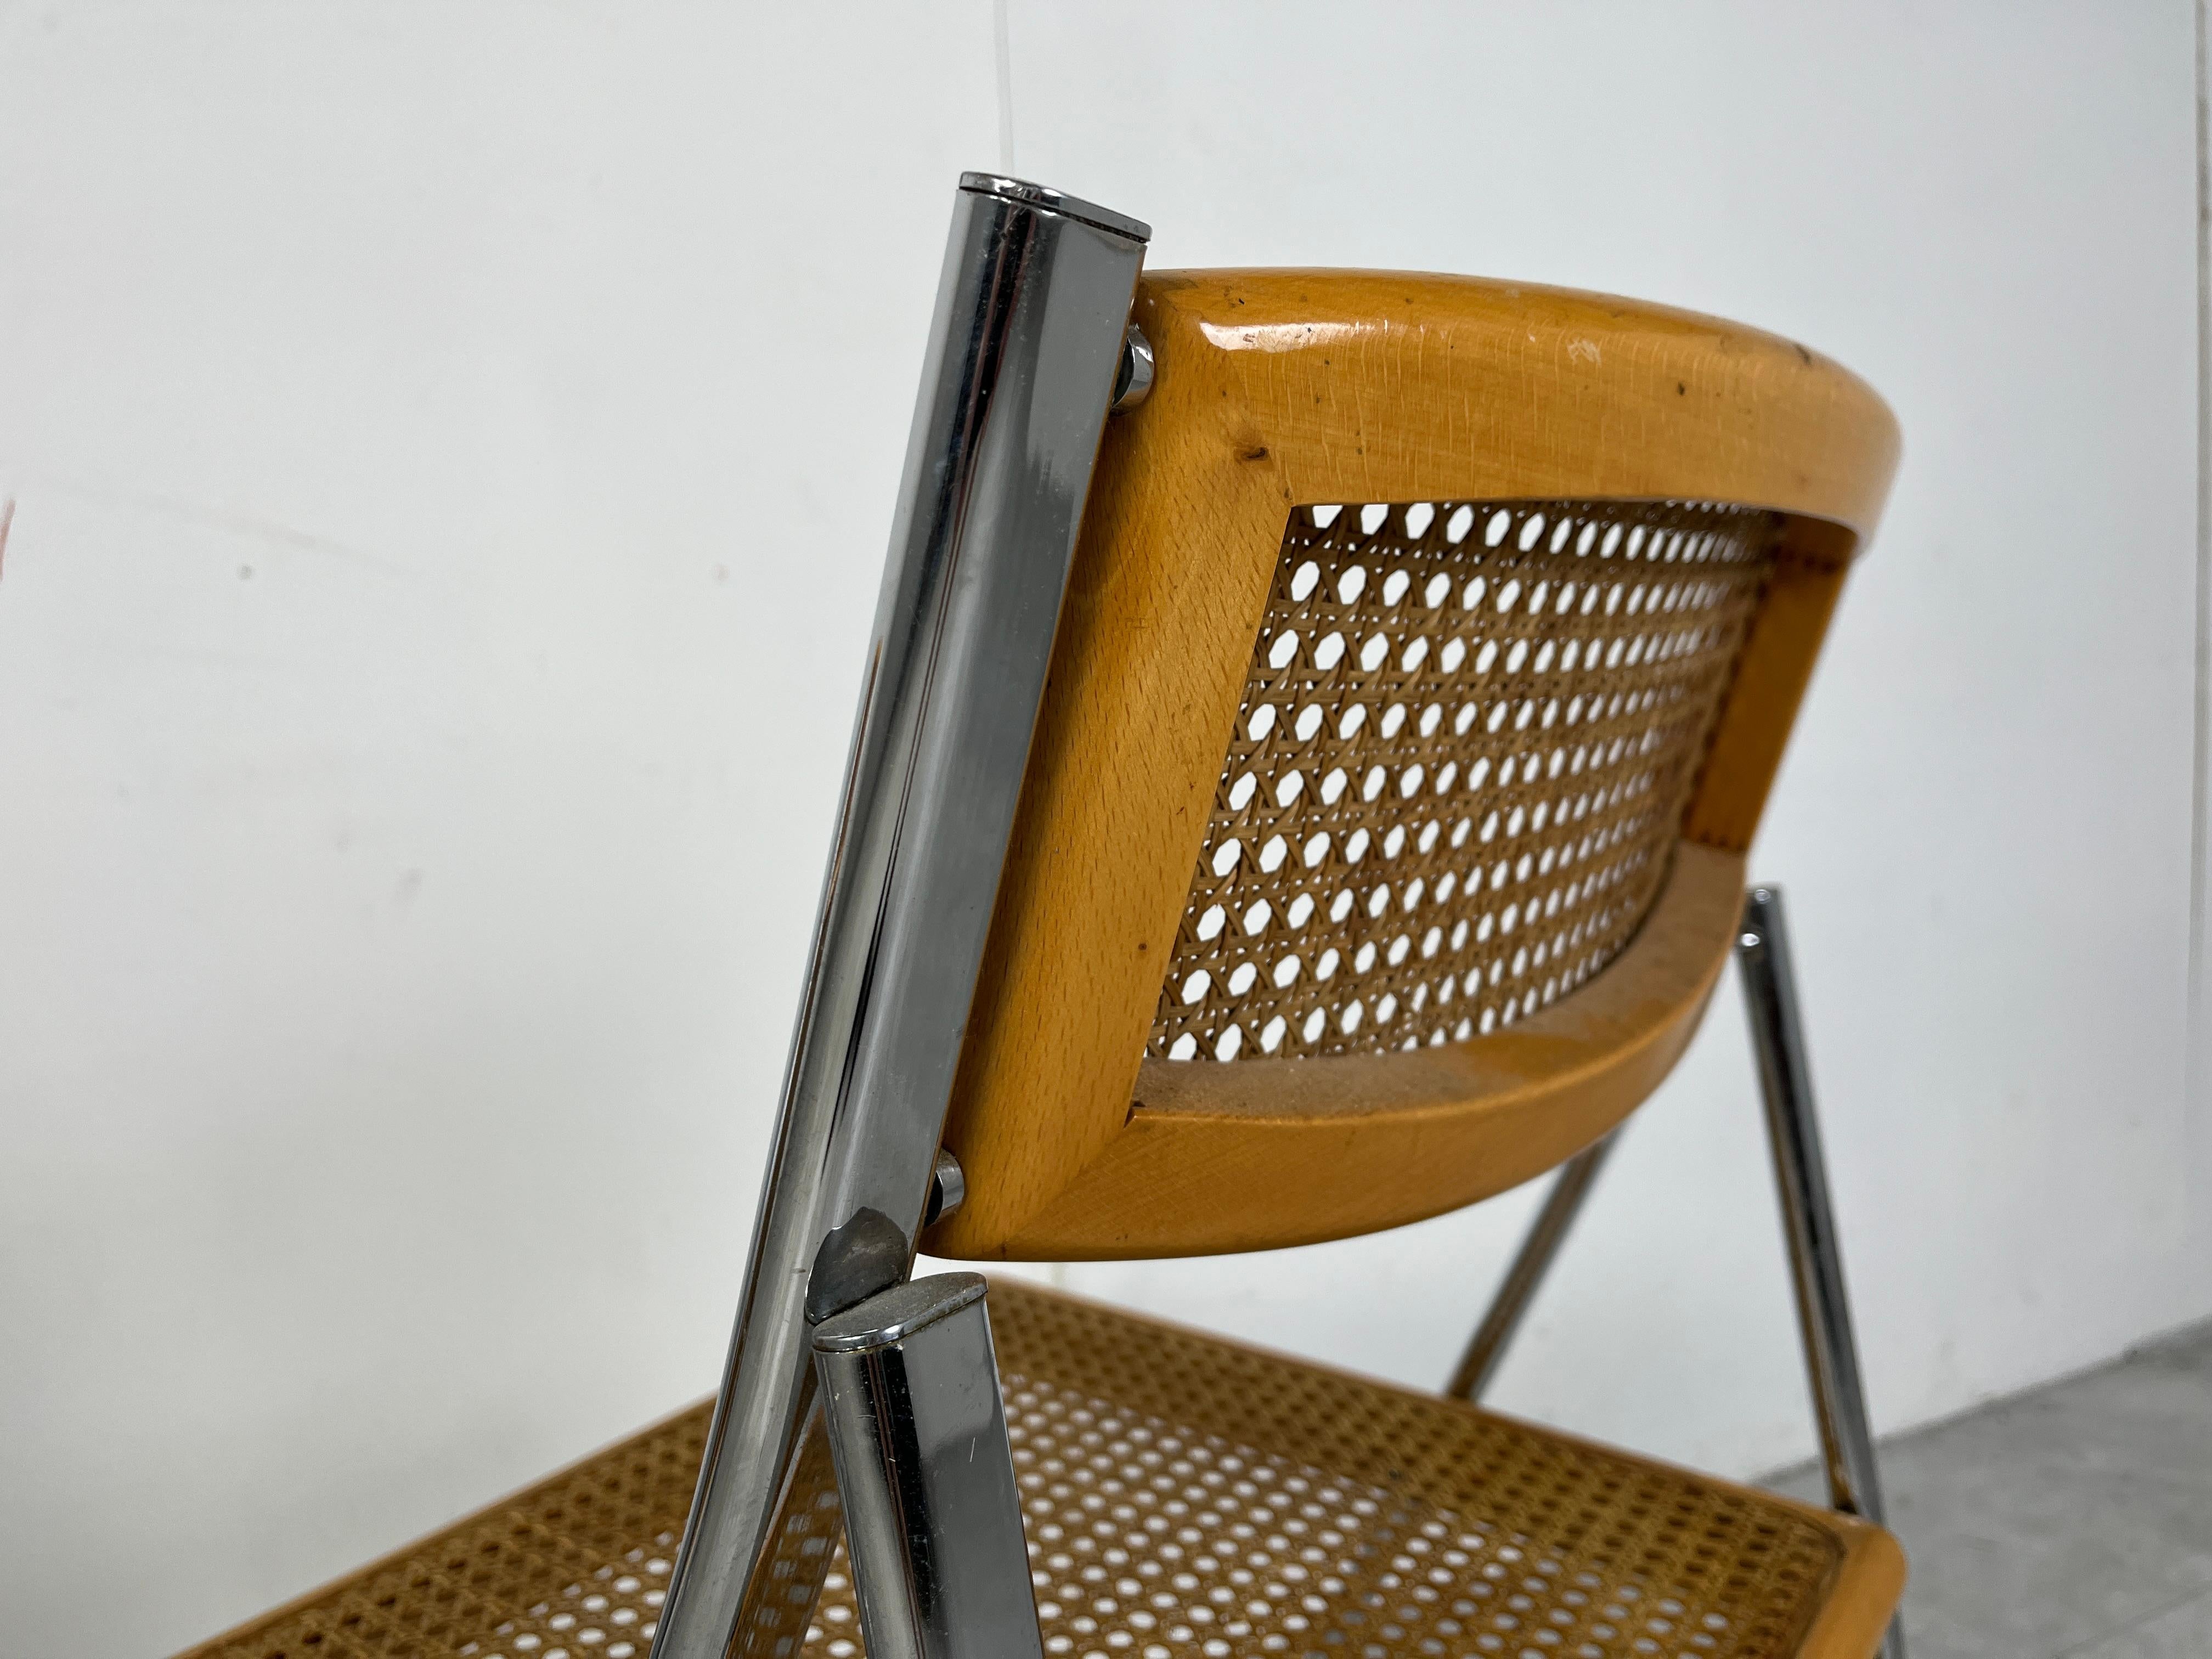 Set of 4 vintage italian foldable chairs with a chrome and beech wooden frame and rattan backrests/seats.

Timeless and practical design.

Good condition.

1970s - Italy

Dimensions: 
Height: 84cm/33.07